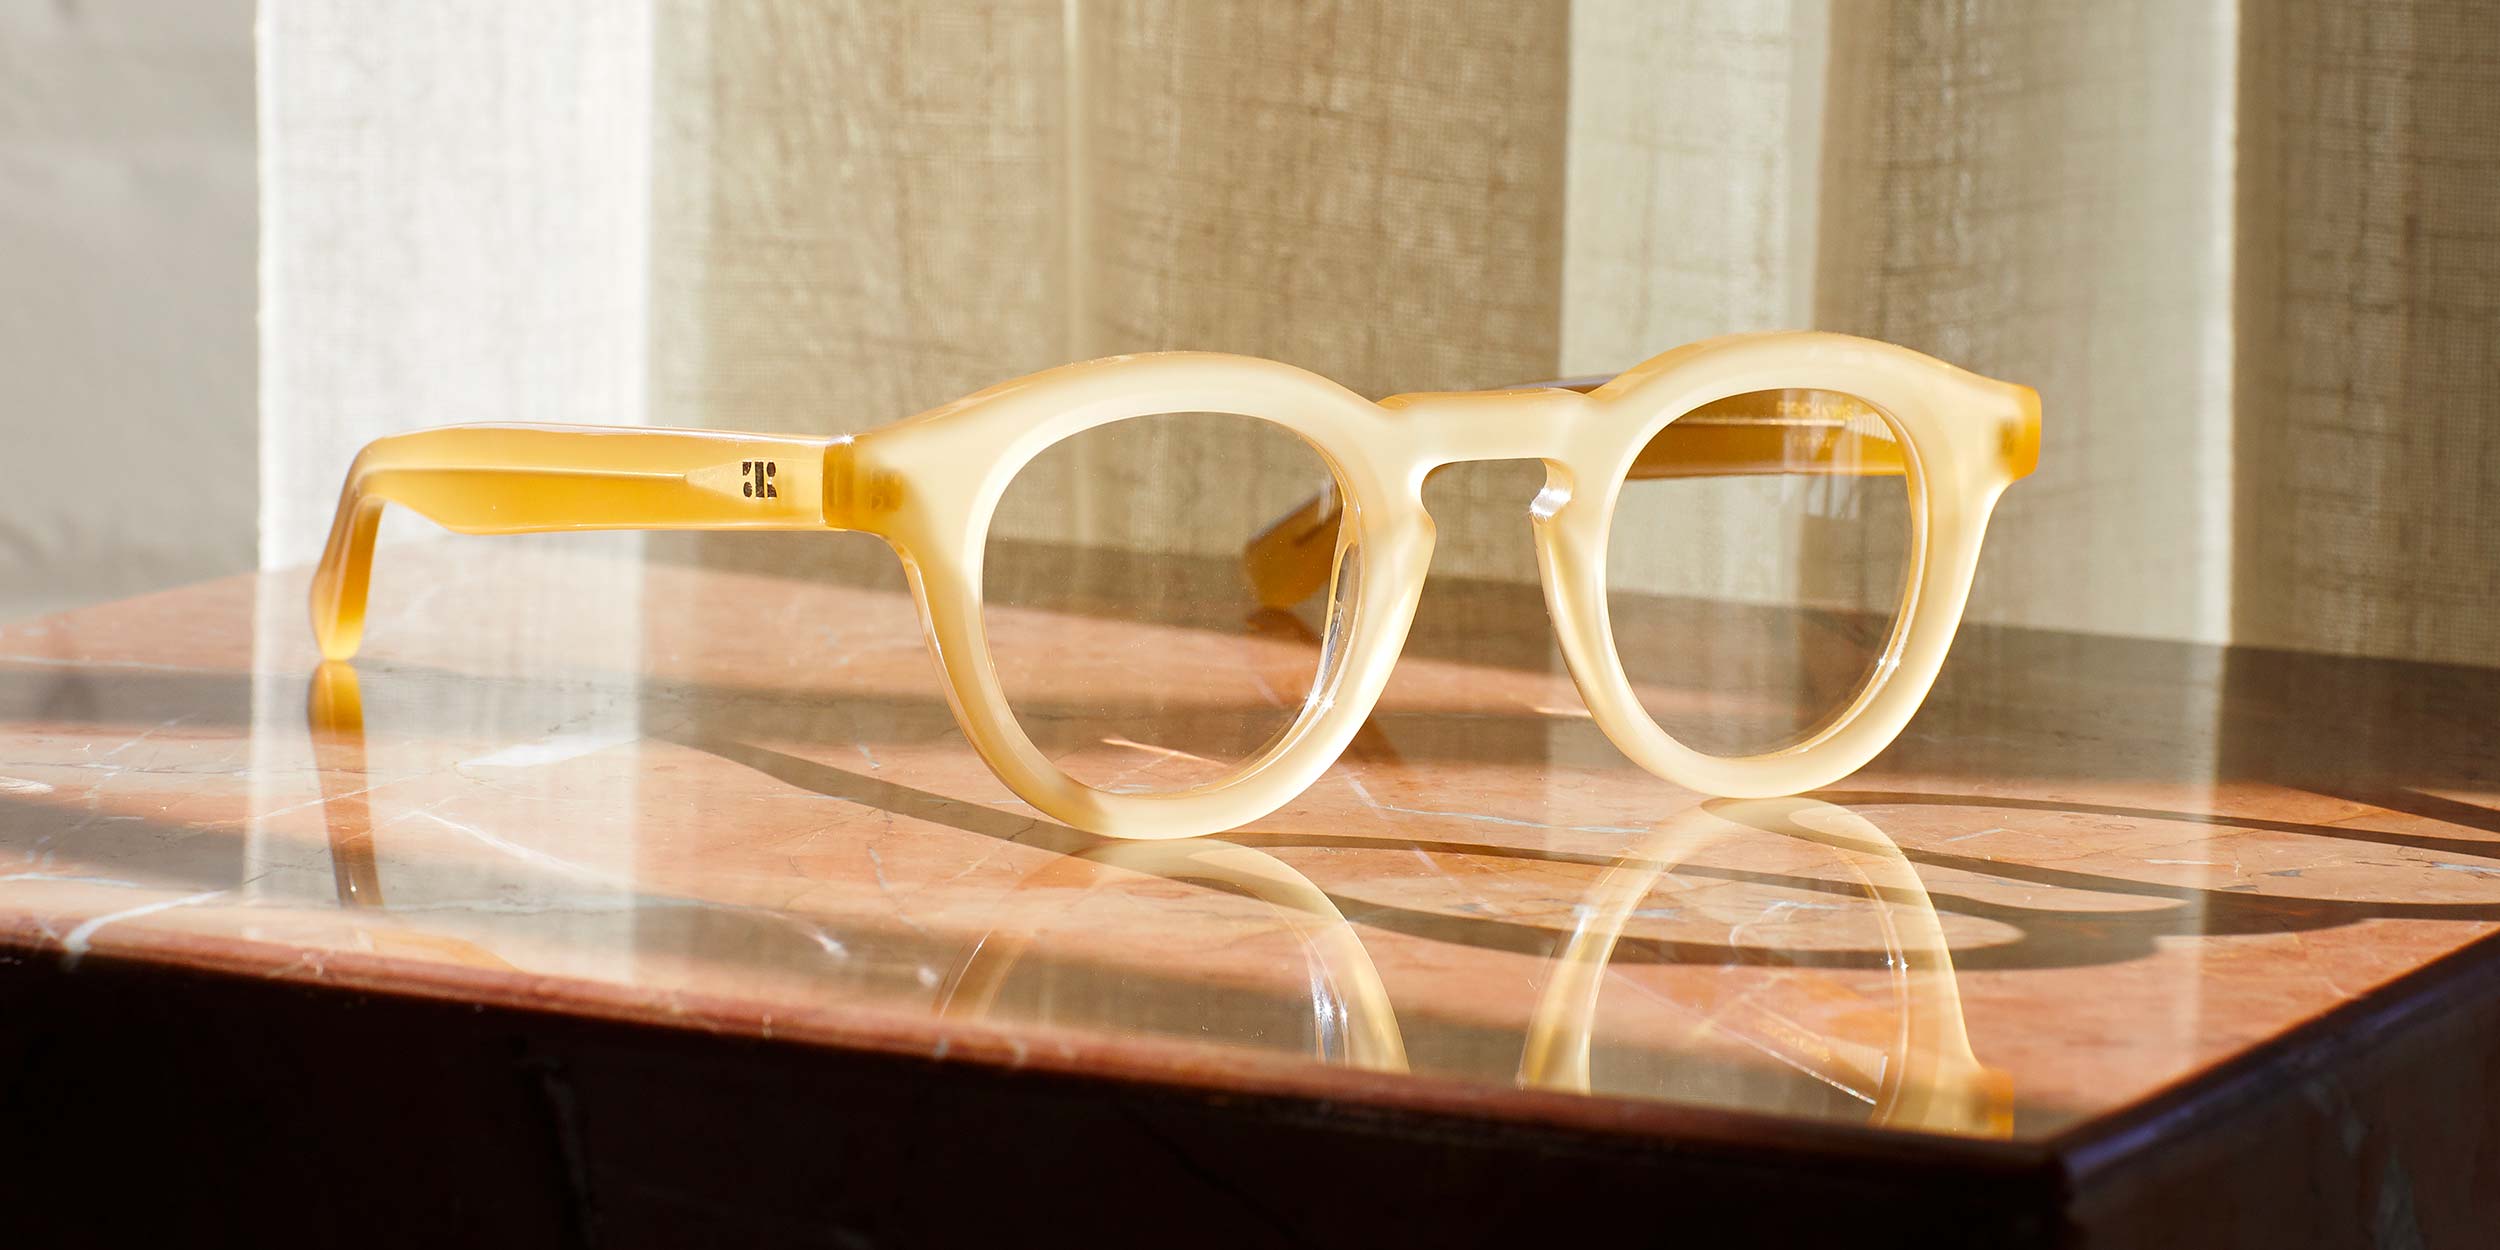 Photo Details of Jude Honey Reading Glasses in a room